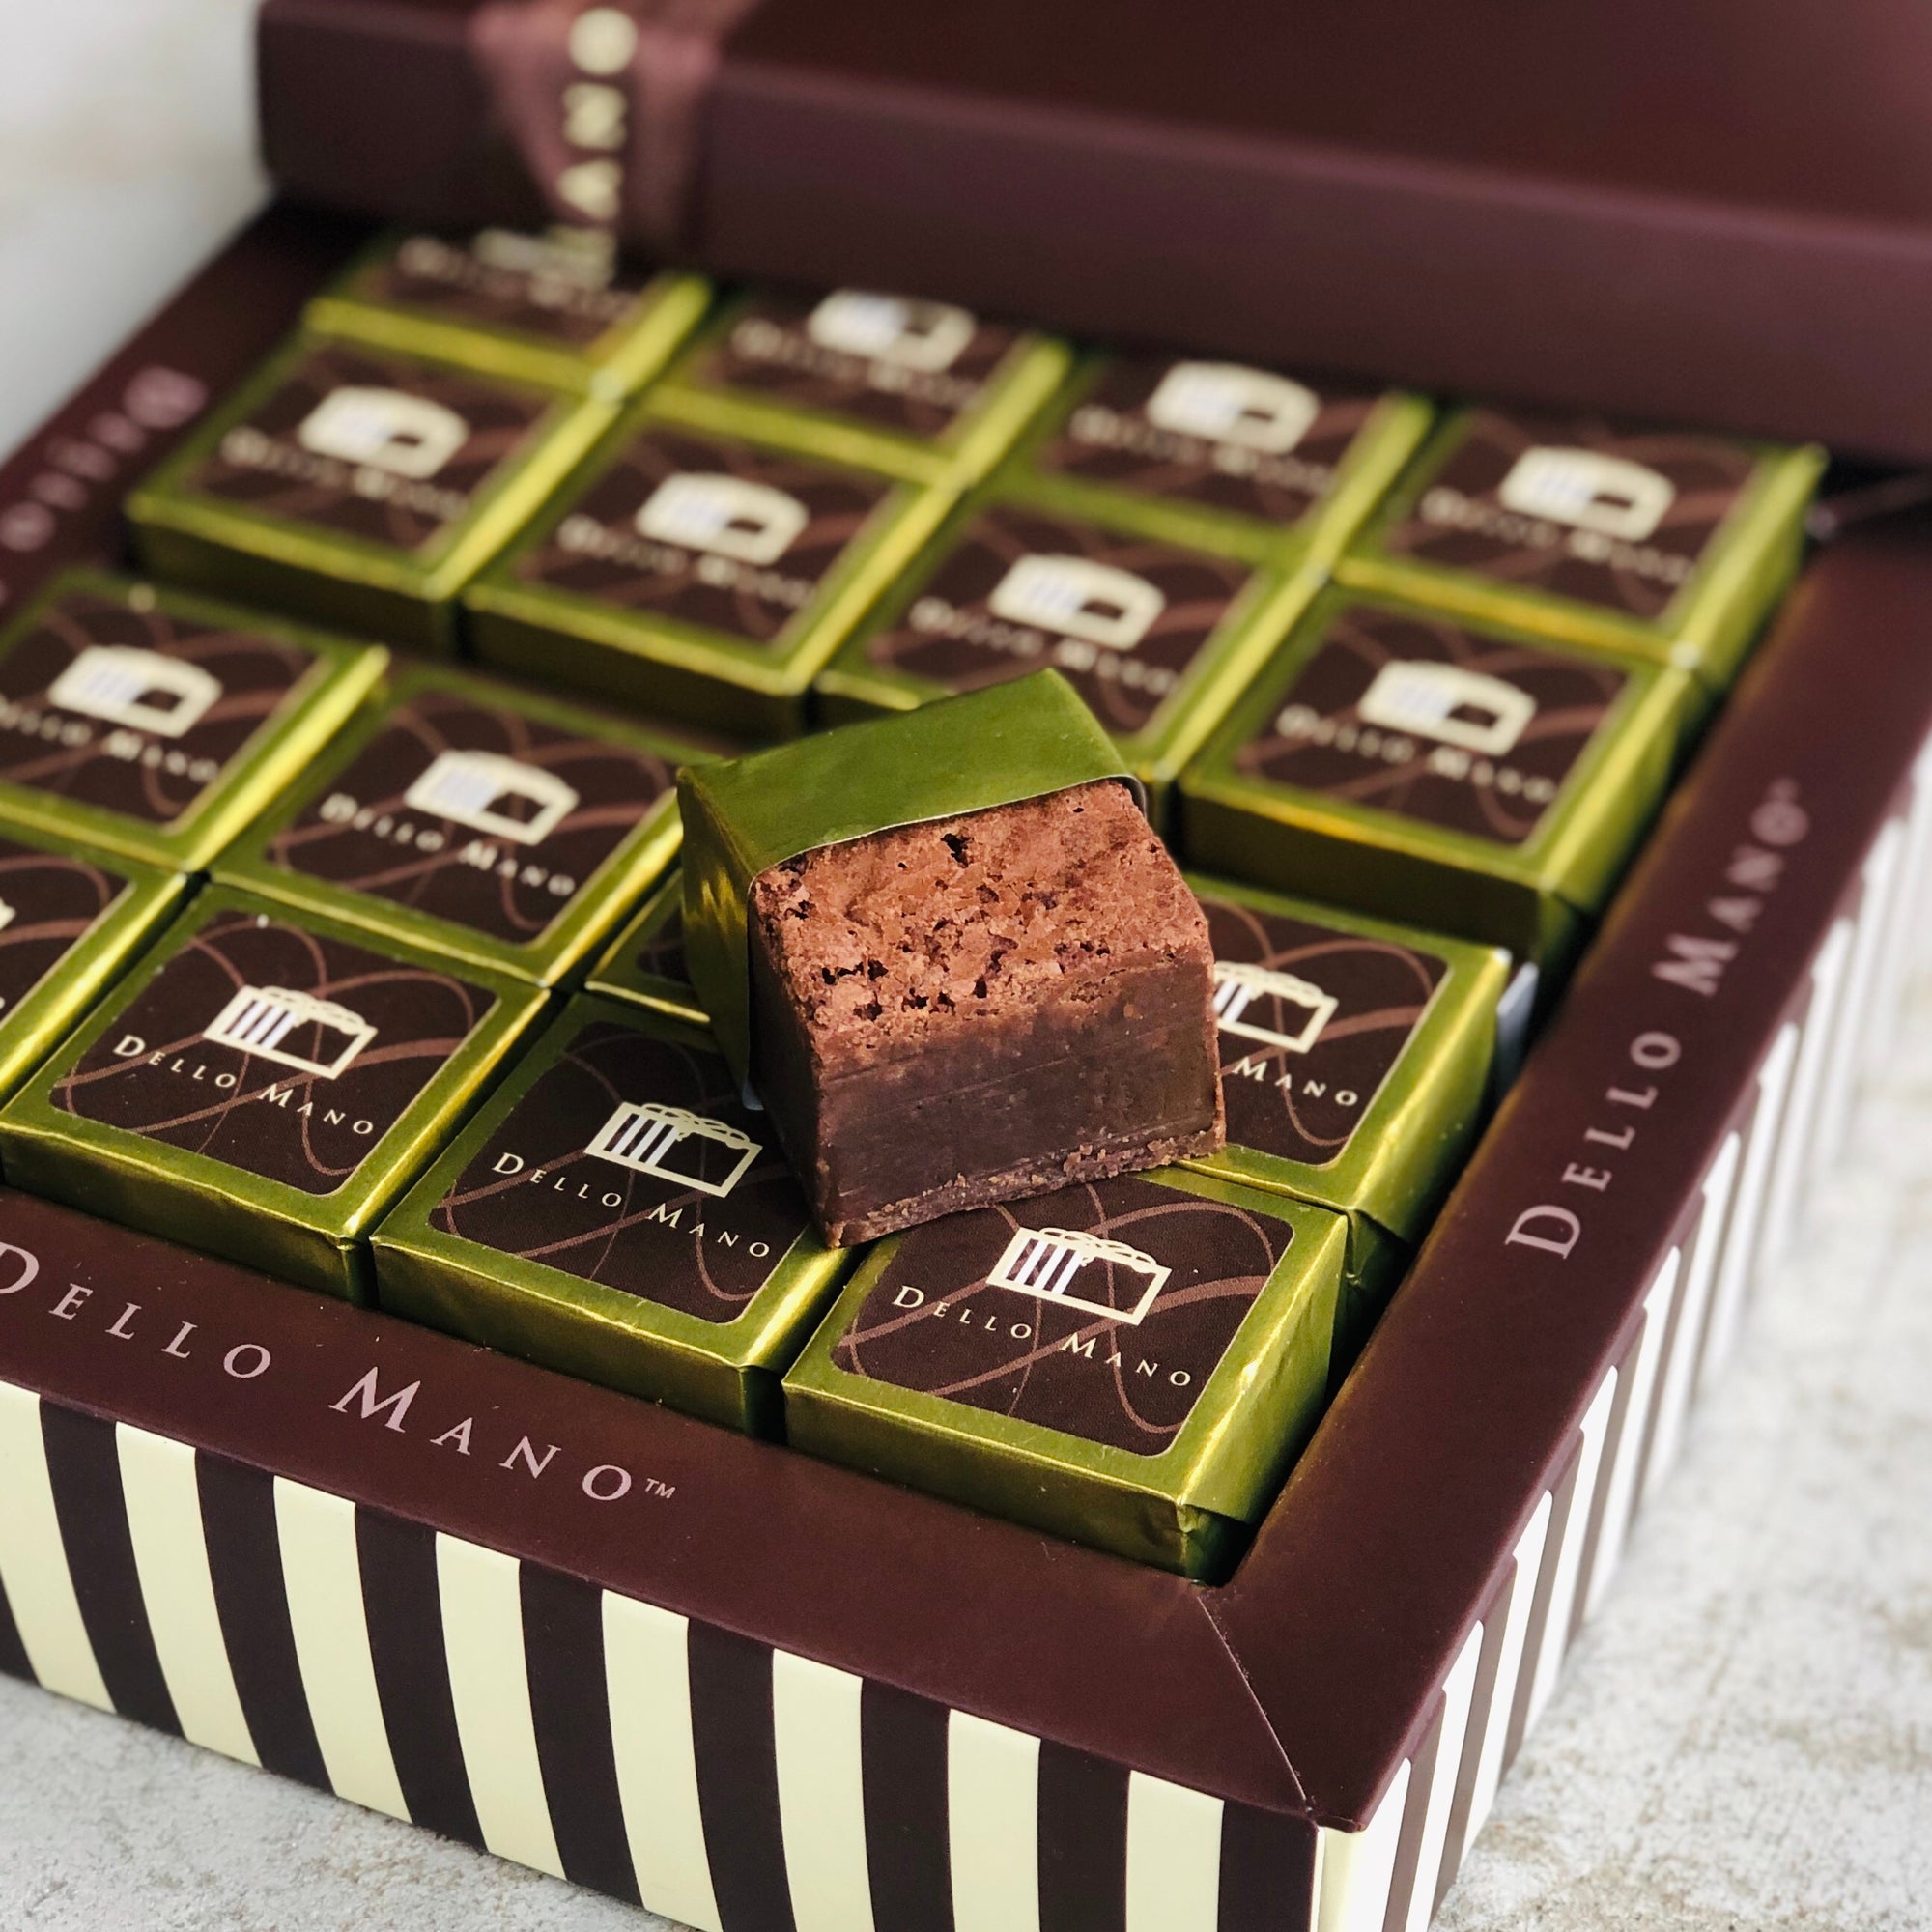 6 Reasons Dello Mano Brownies are the Perfect Housewarming Gift